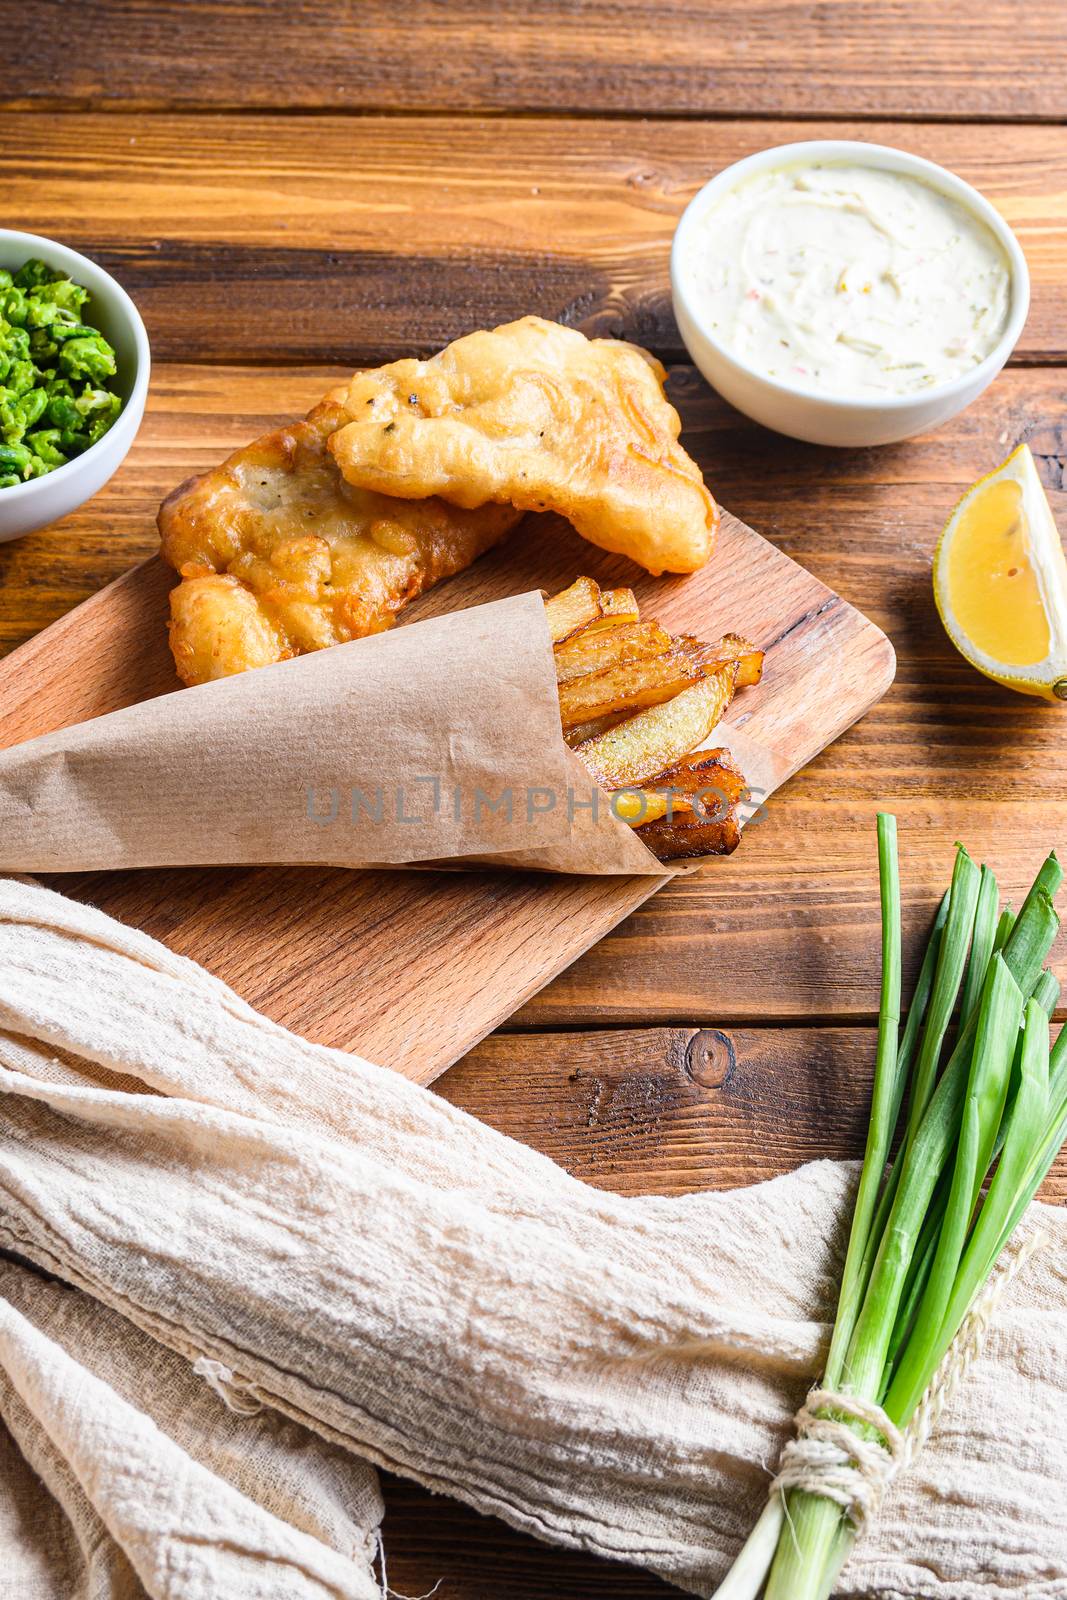 Traditional Fish and chips with mashed peas, tartar sauce inn crumpled paper cone on wood chopping board dip and lemon - fried cod, french fries, lemon slices, tartar sauce, ketchup tomatoe served in the Pub or Restaurant over light old wooden planks table vertical side view close up by Ilianesolenyi